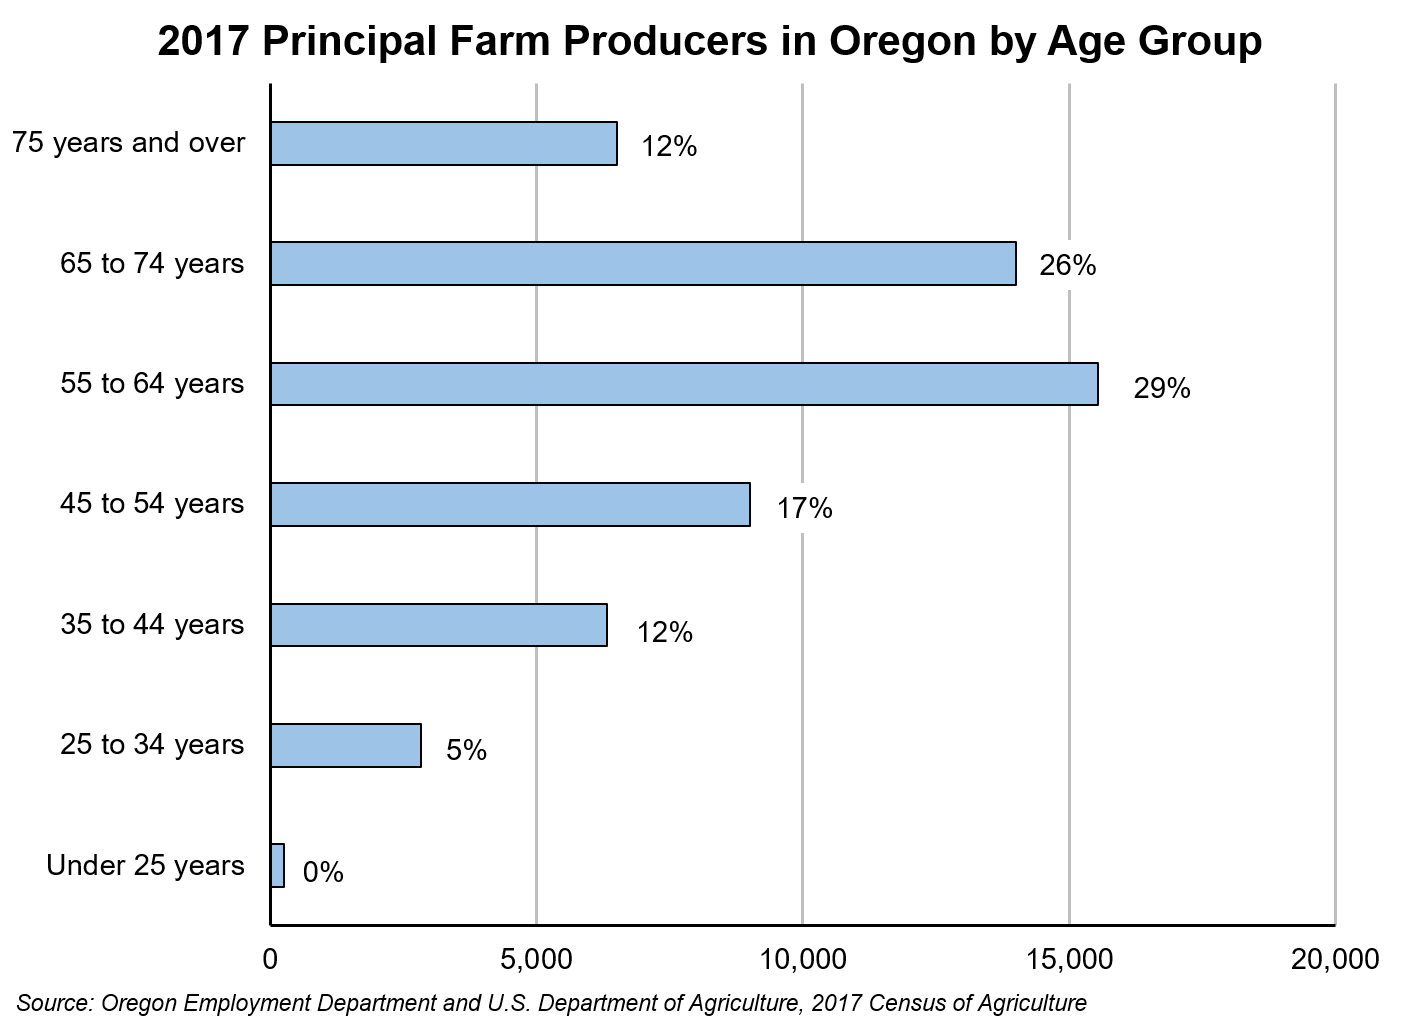 Graph showing 2017 principal farm producers in Oregon by age group